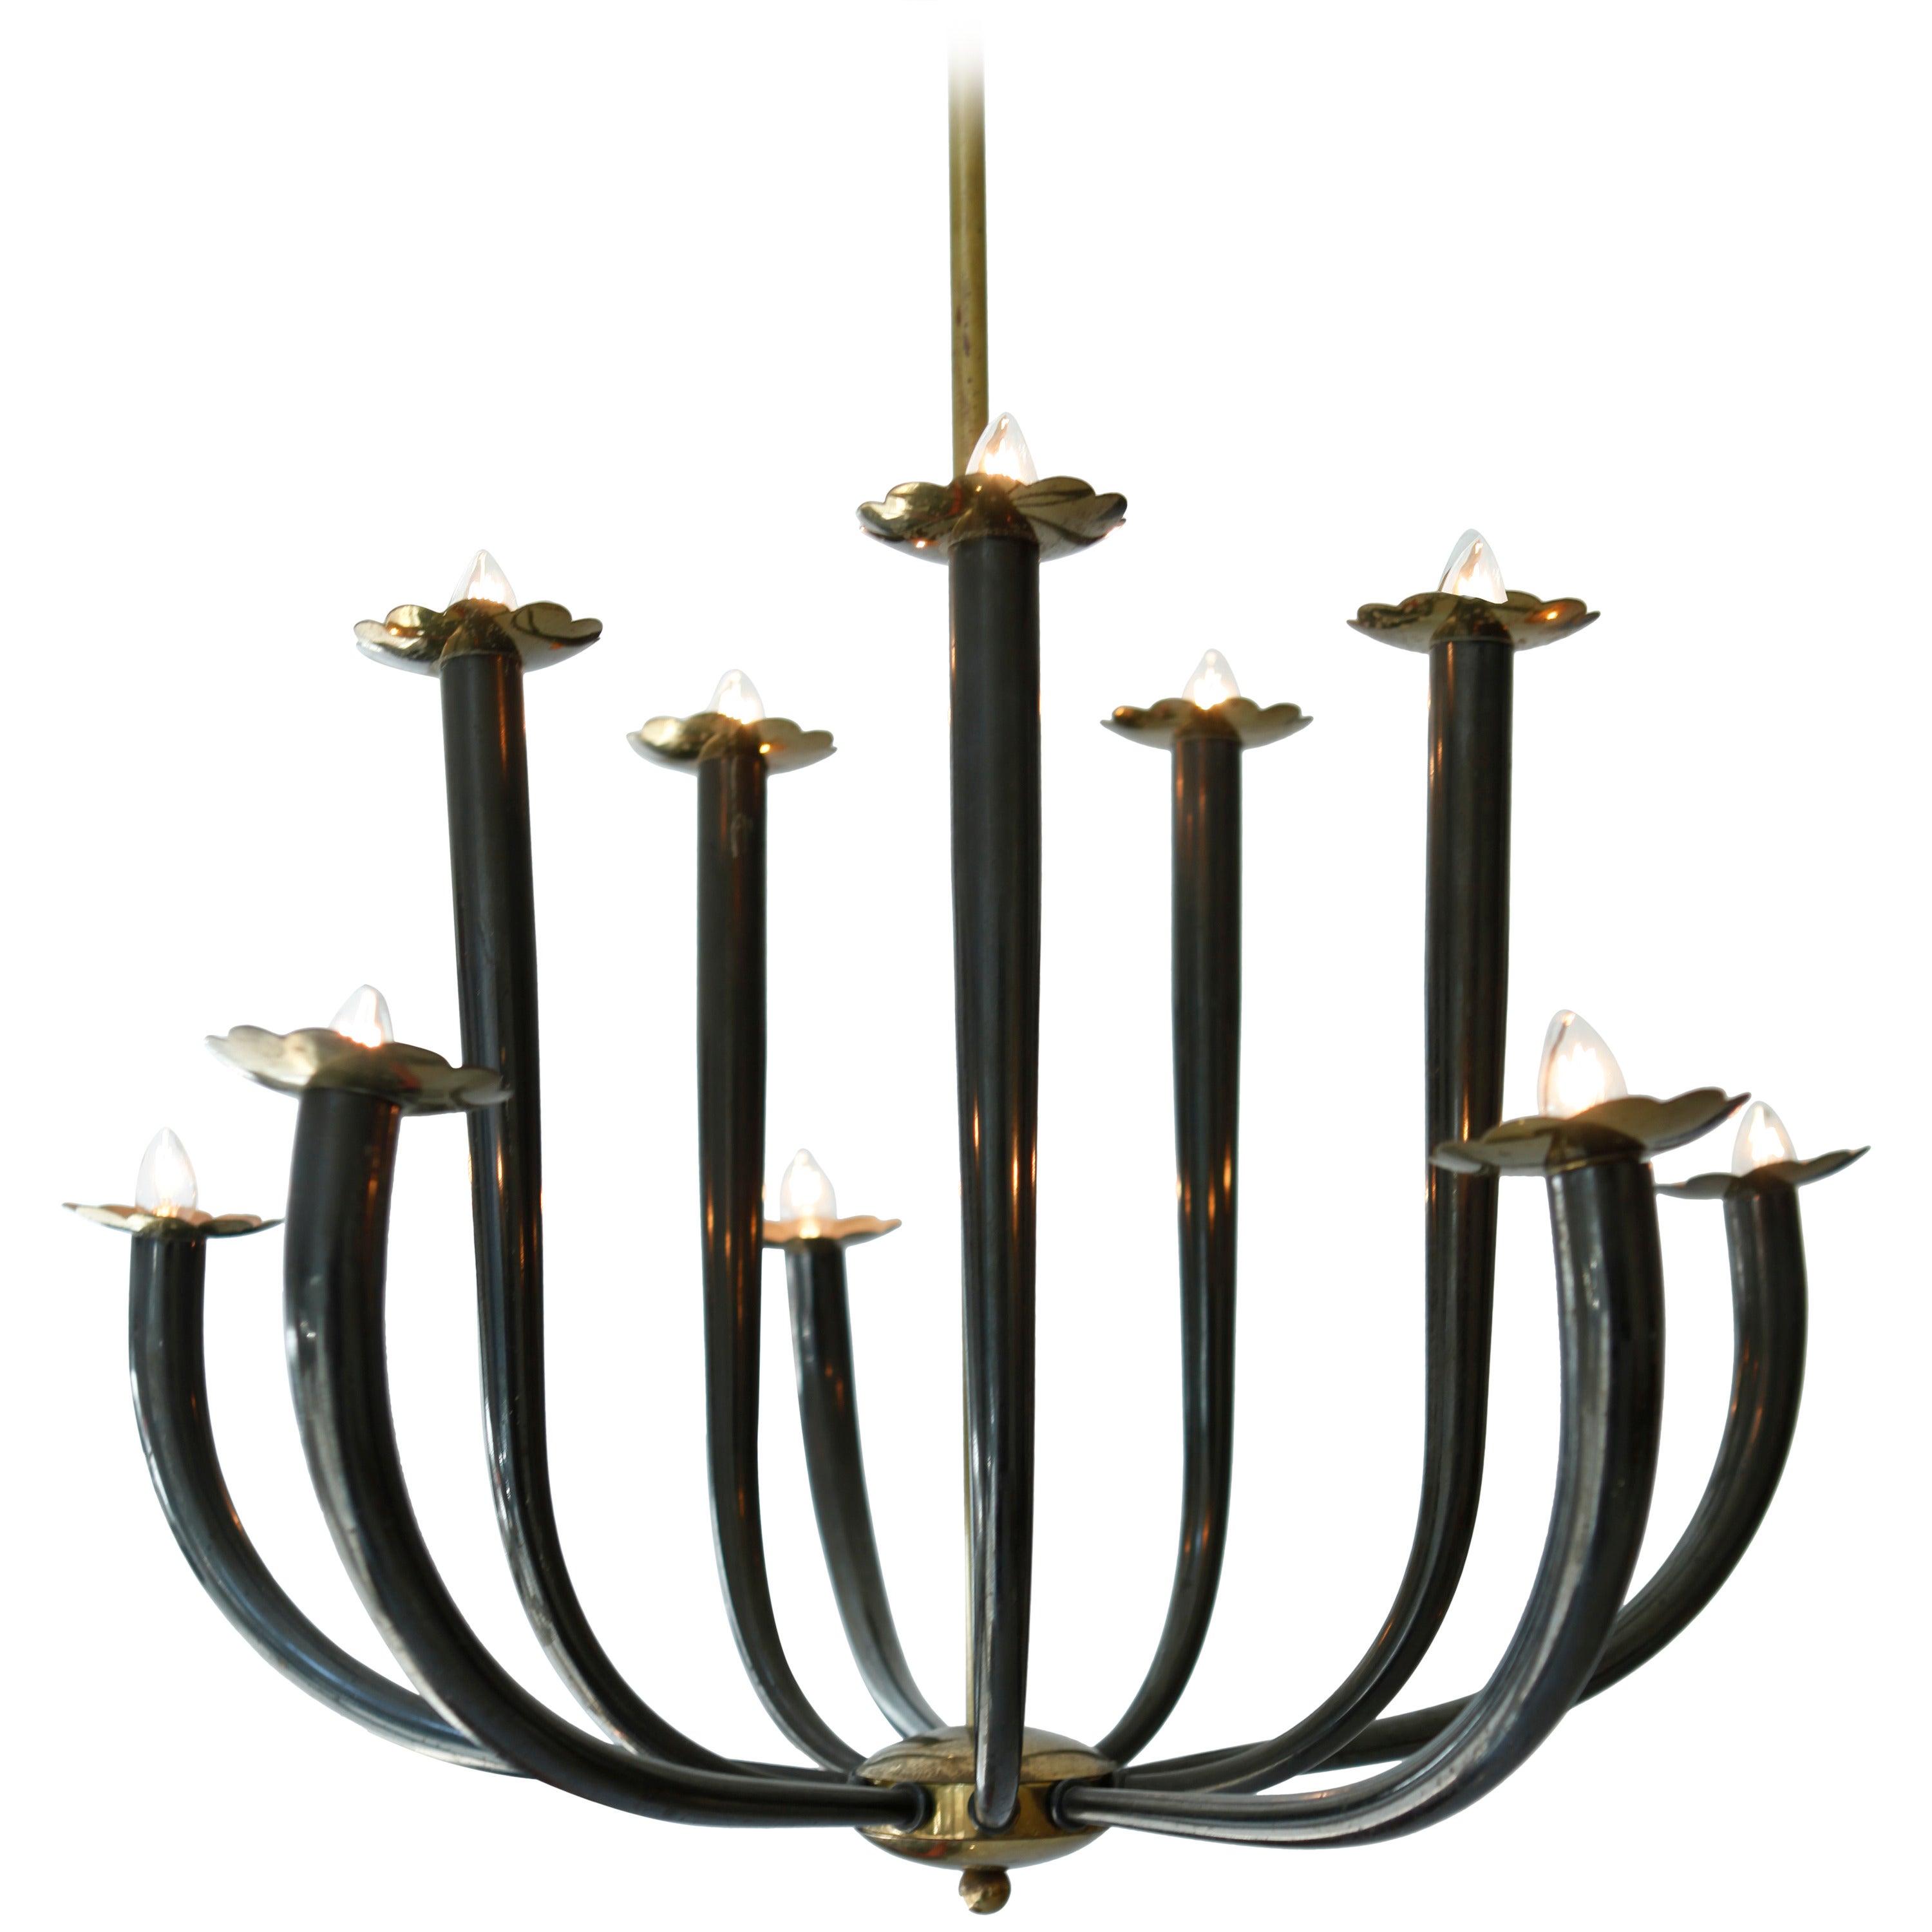 G. Ulrich Chandelier with Ten Lights, circa 1940s For Sale